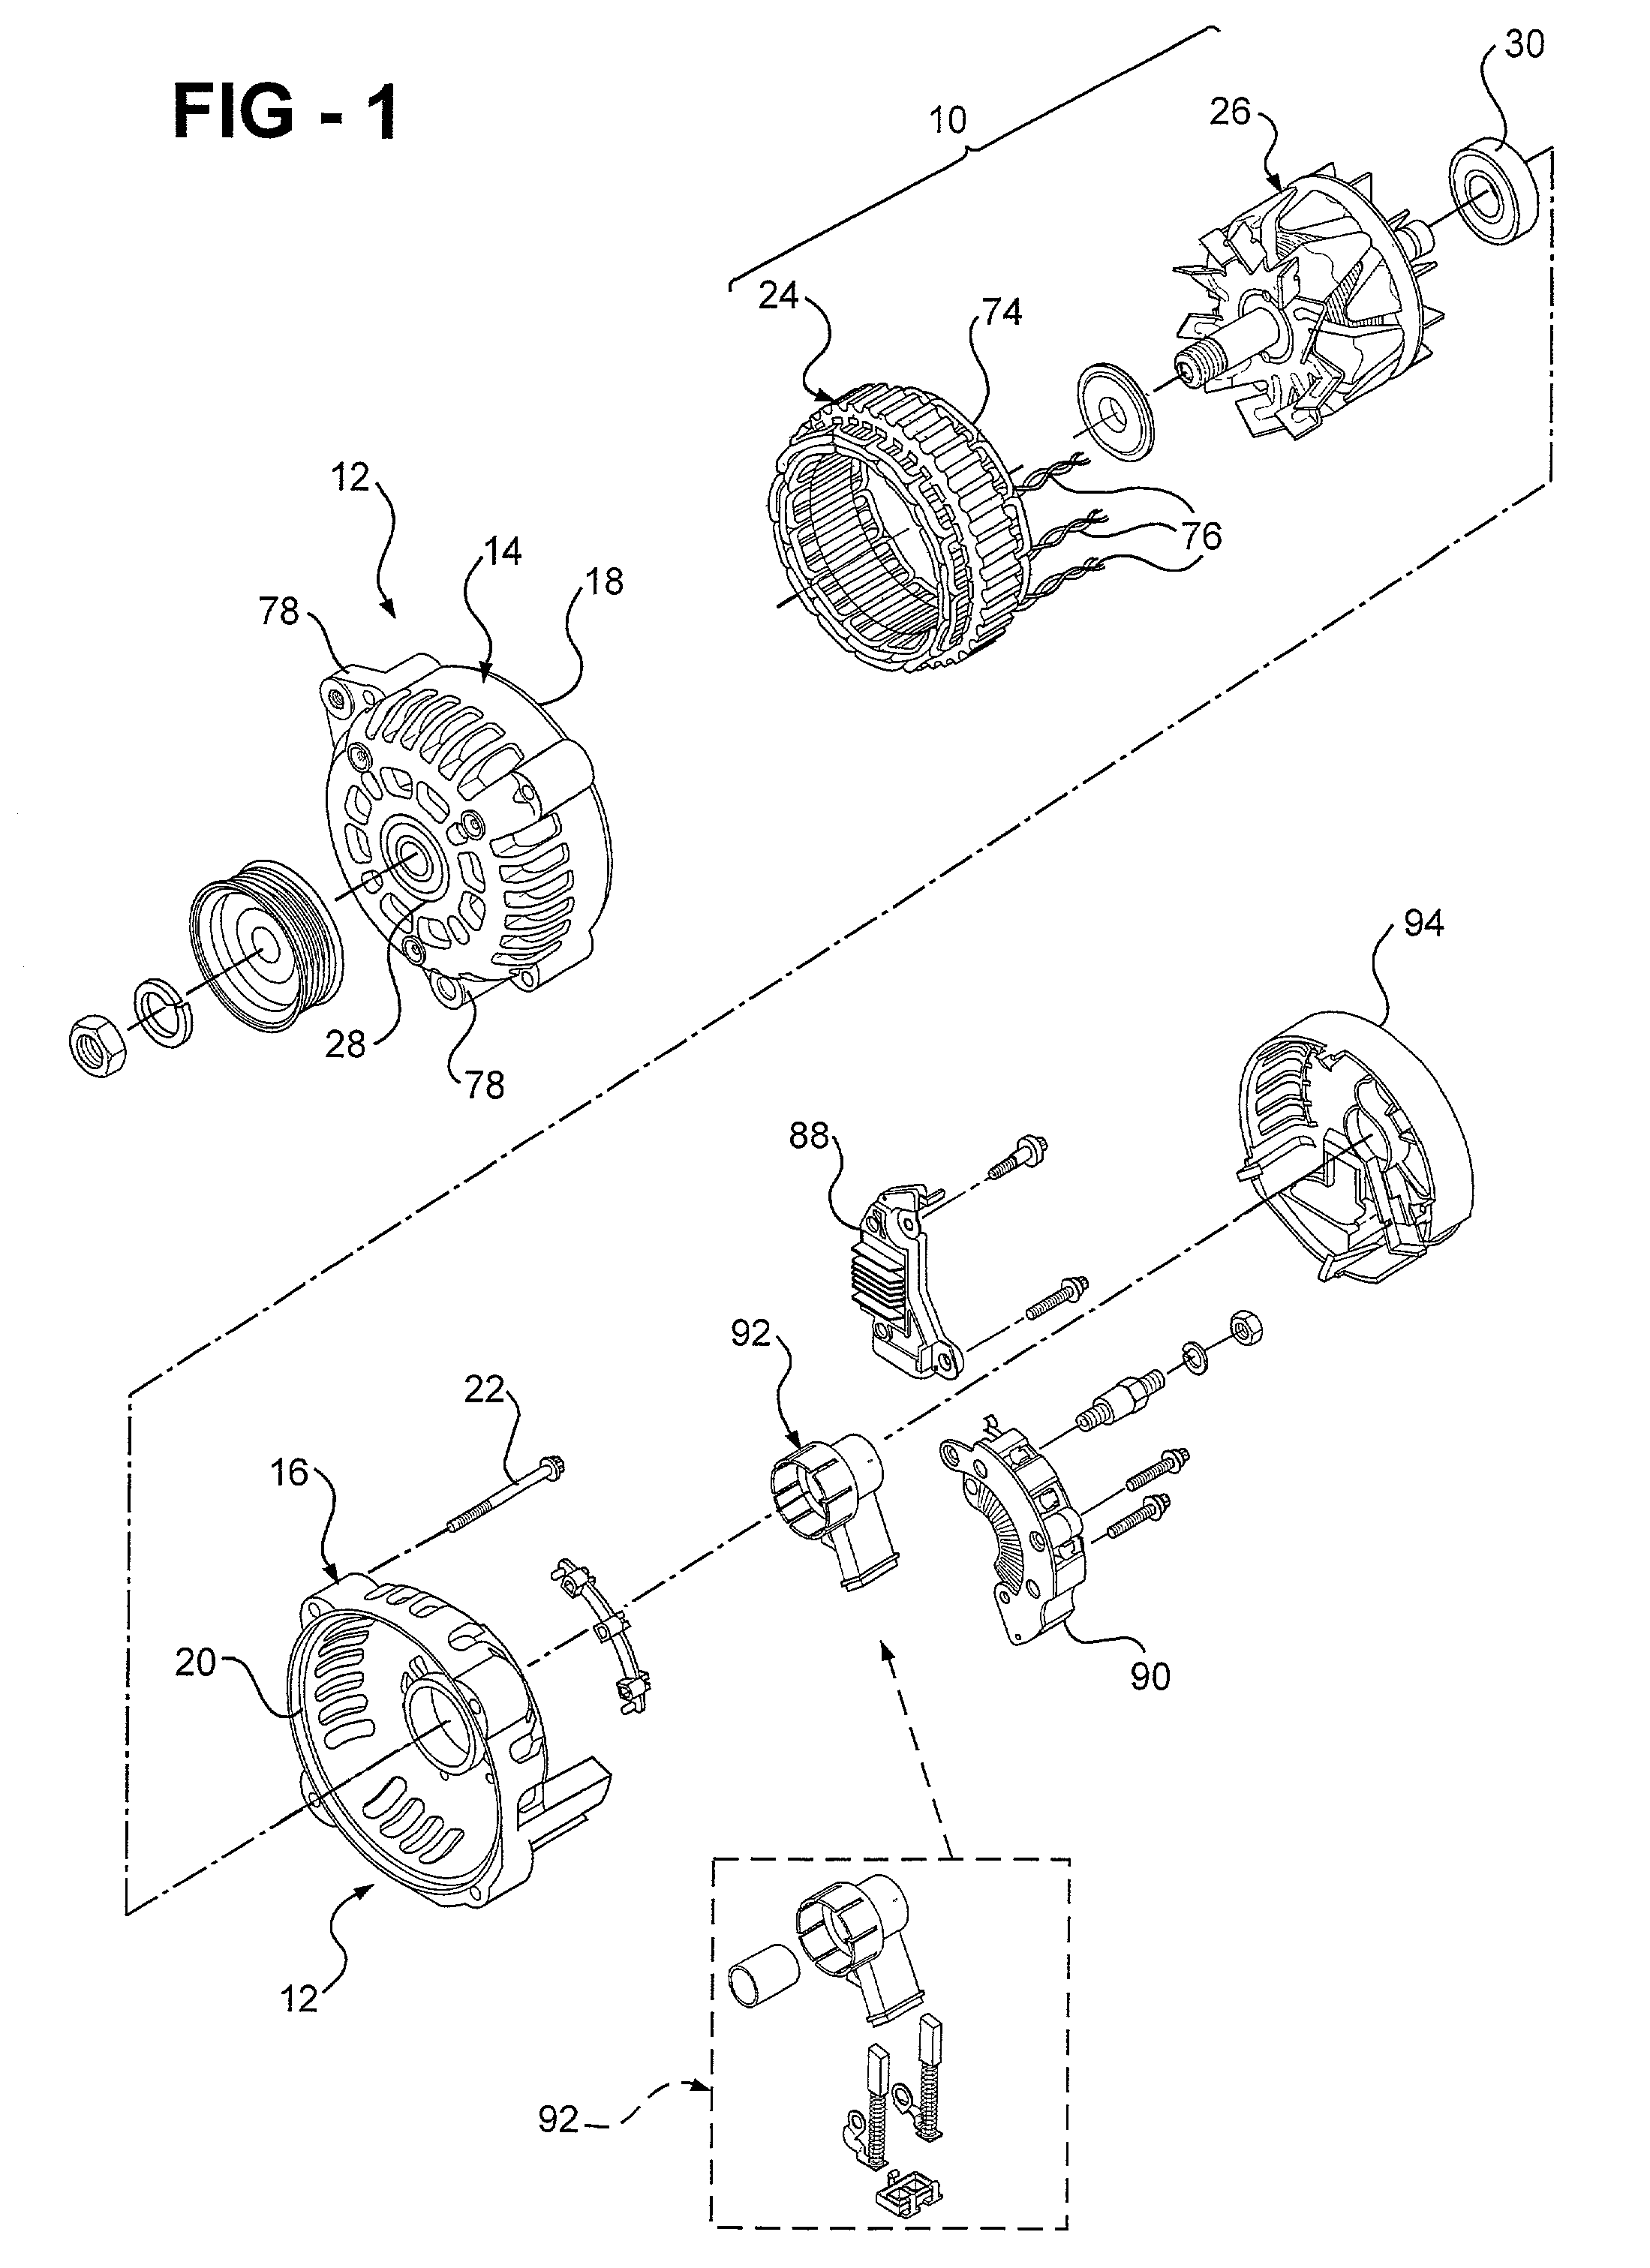 Alternator and method of manufacture